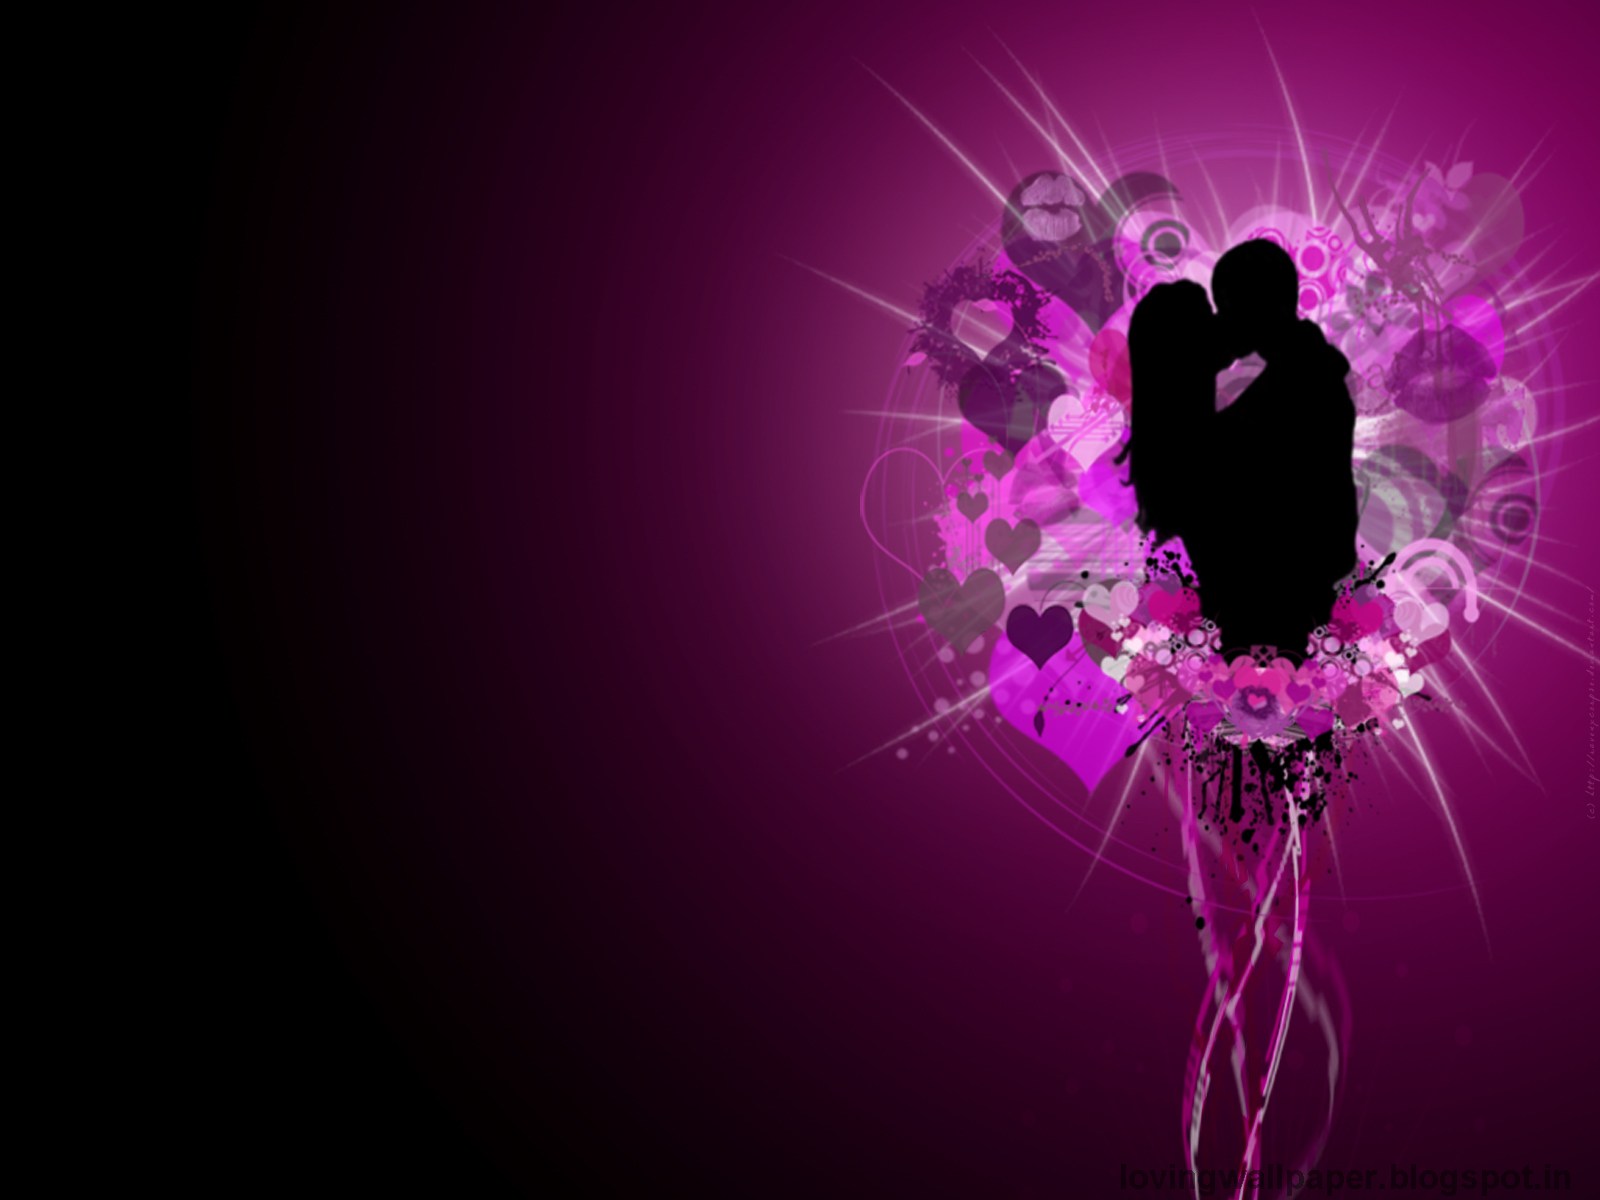 Cute Love Wallpaper Cute Wallpapers Mobile - Romantic Love Background  Images Hd - 1600x1200 Wallpaper 